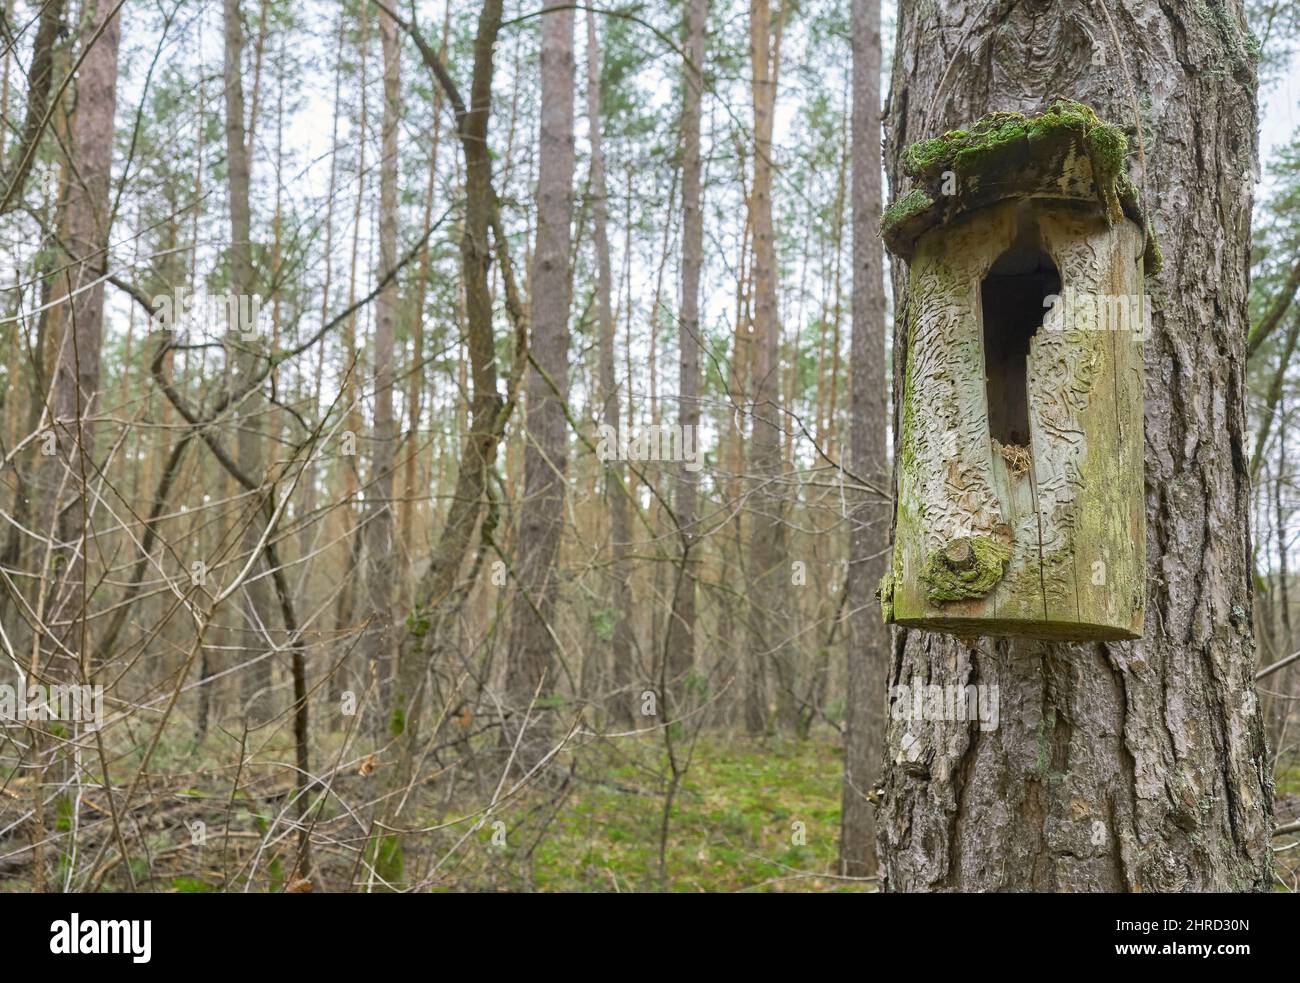 Wooden birdhouse in a forest, selective focus. Stock Photo